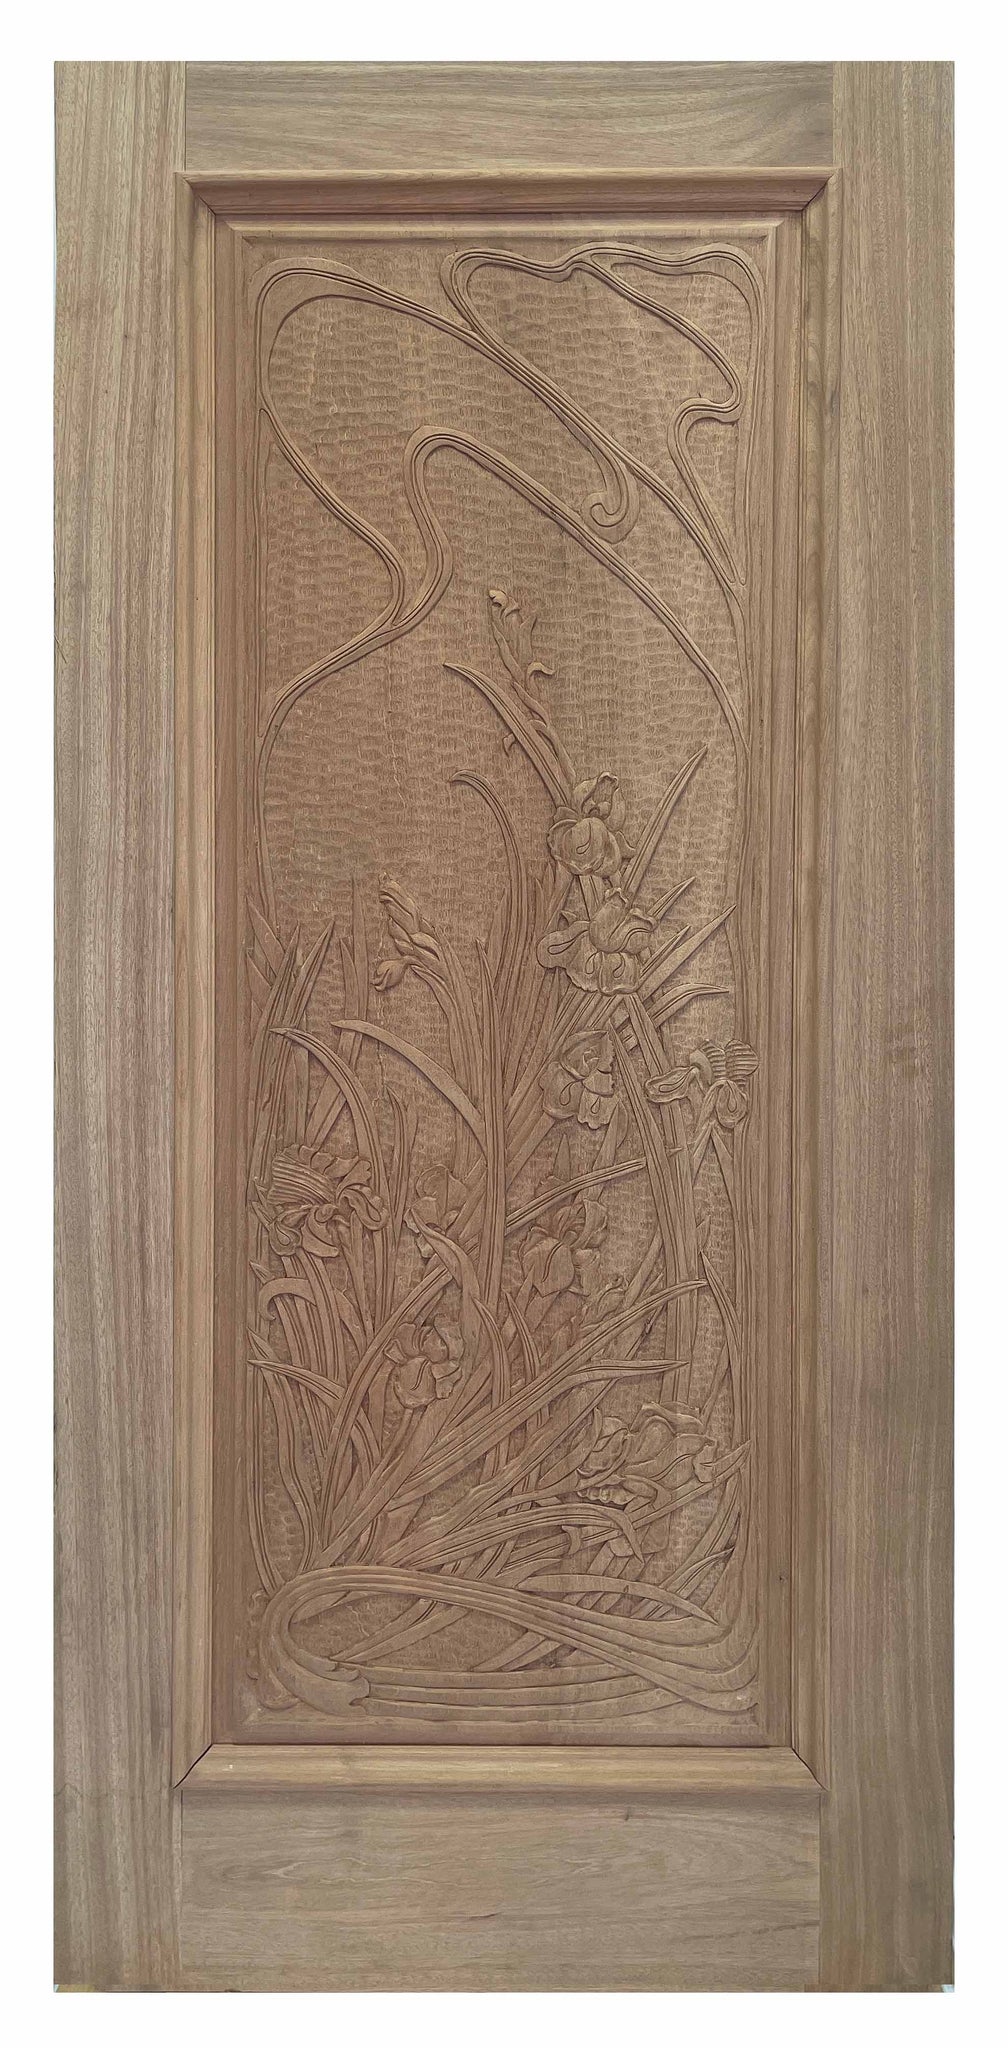 3 ft. x 6 ft. 8 in. Unfinished Mahogany Wood Exterior Door with Plant Carvings